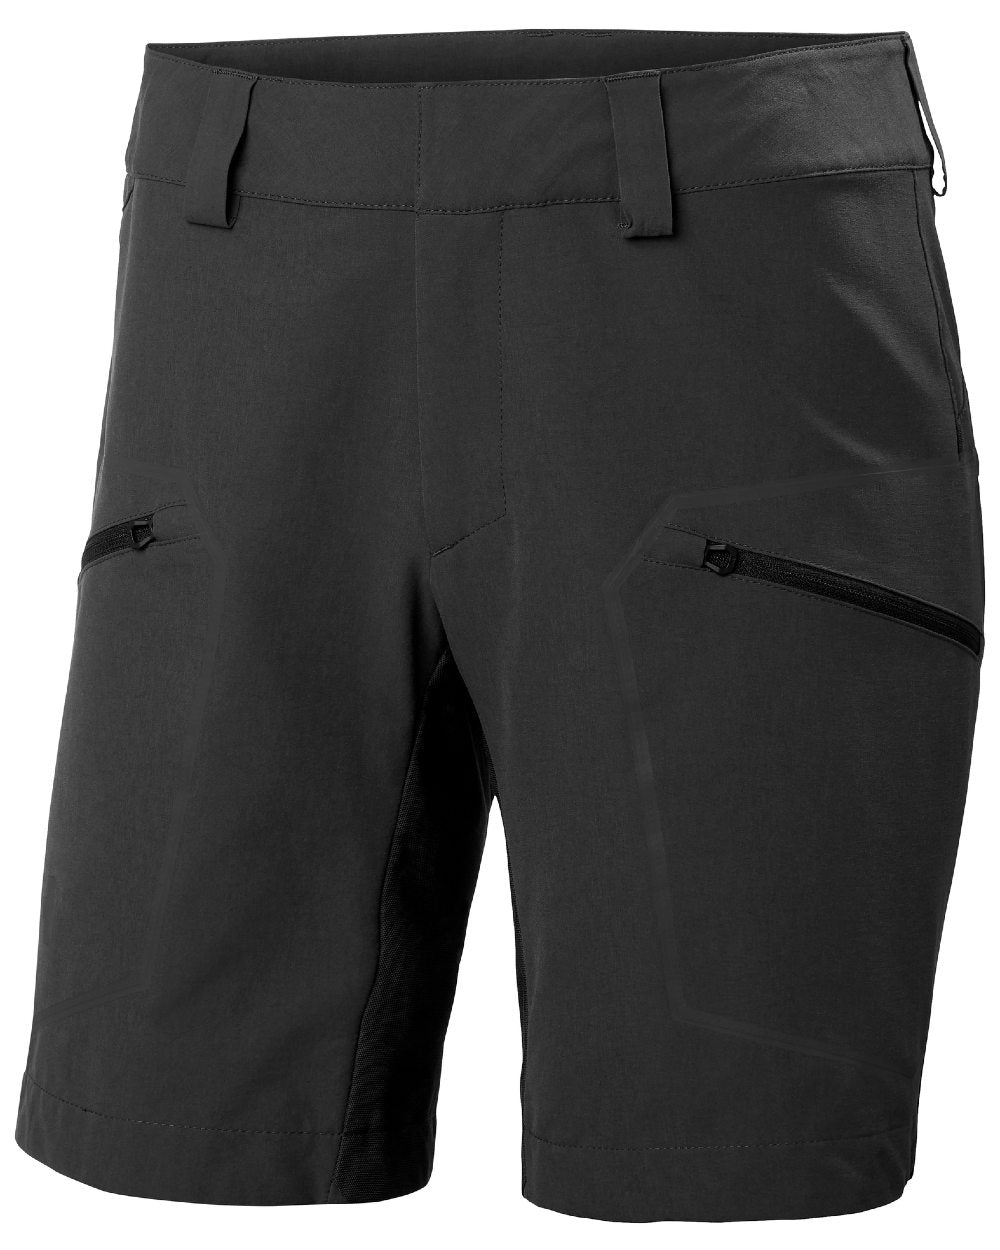 Ebony coloured Helly Hansen Womens HP Racing Deck Shorts on white background 